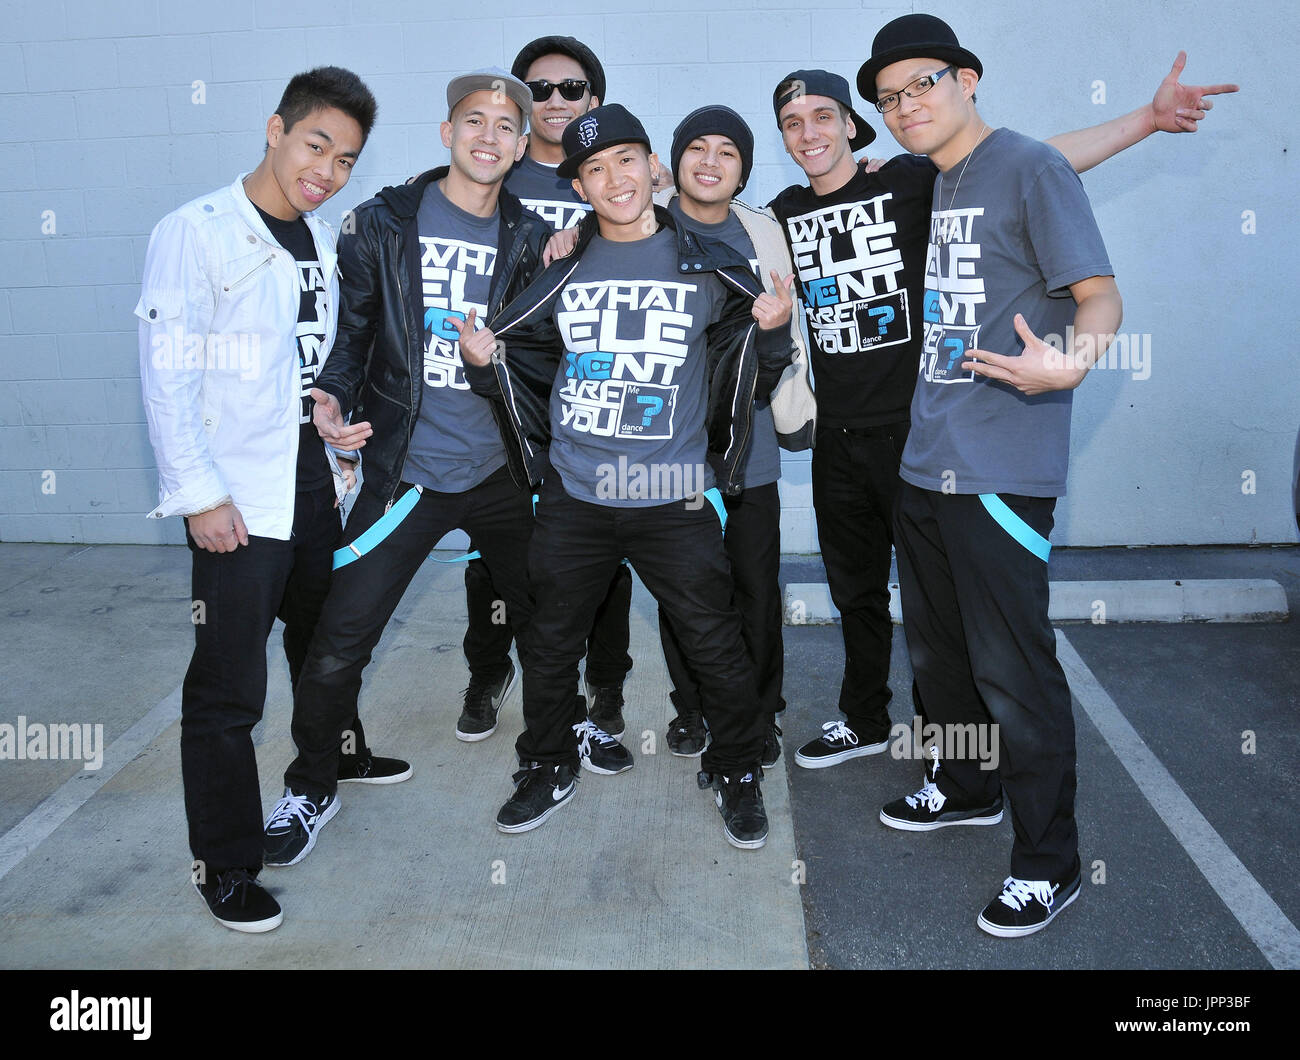 Mixd Elements 2.0 at Randy Jackson's America's Best Dance Crew Season 7 Season Of The Superstars - Los Angeles Auditions at Center Staging in Burbank, CA. The event took place on Saturday, January 28, 2012. Photo by Sthanlee B. Mirador Pacific Rim Photo Press. Stock Photo